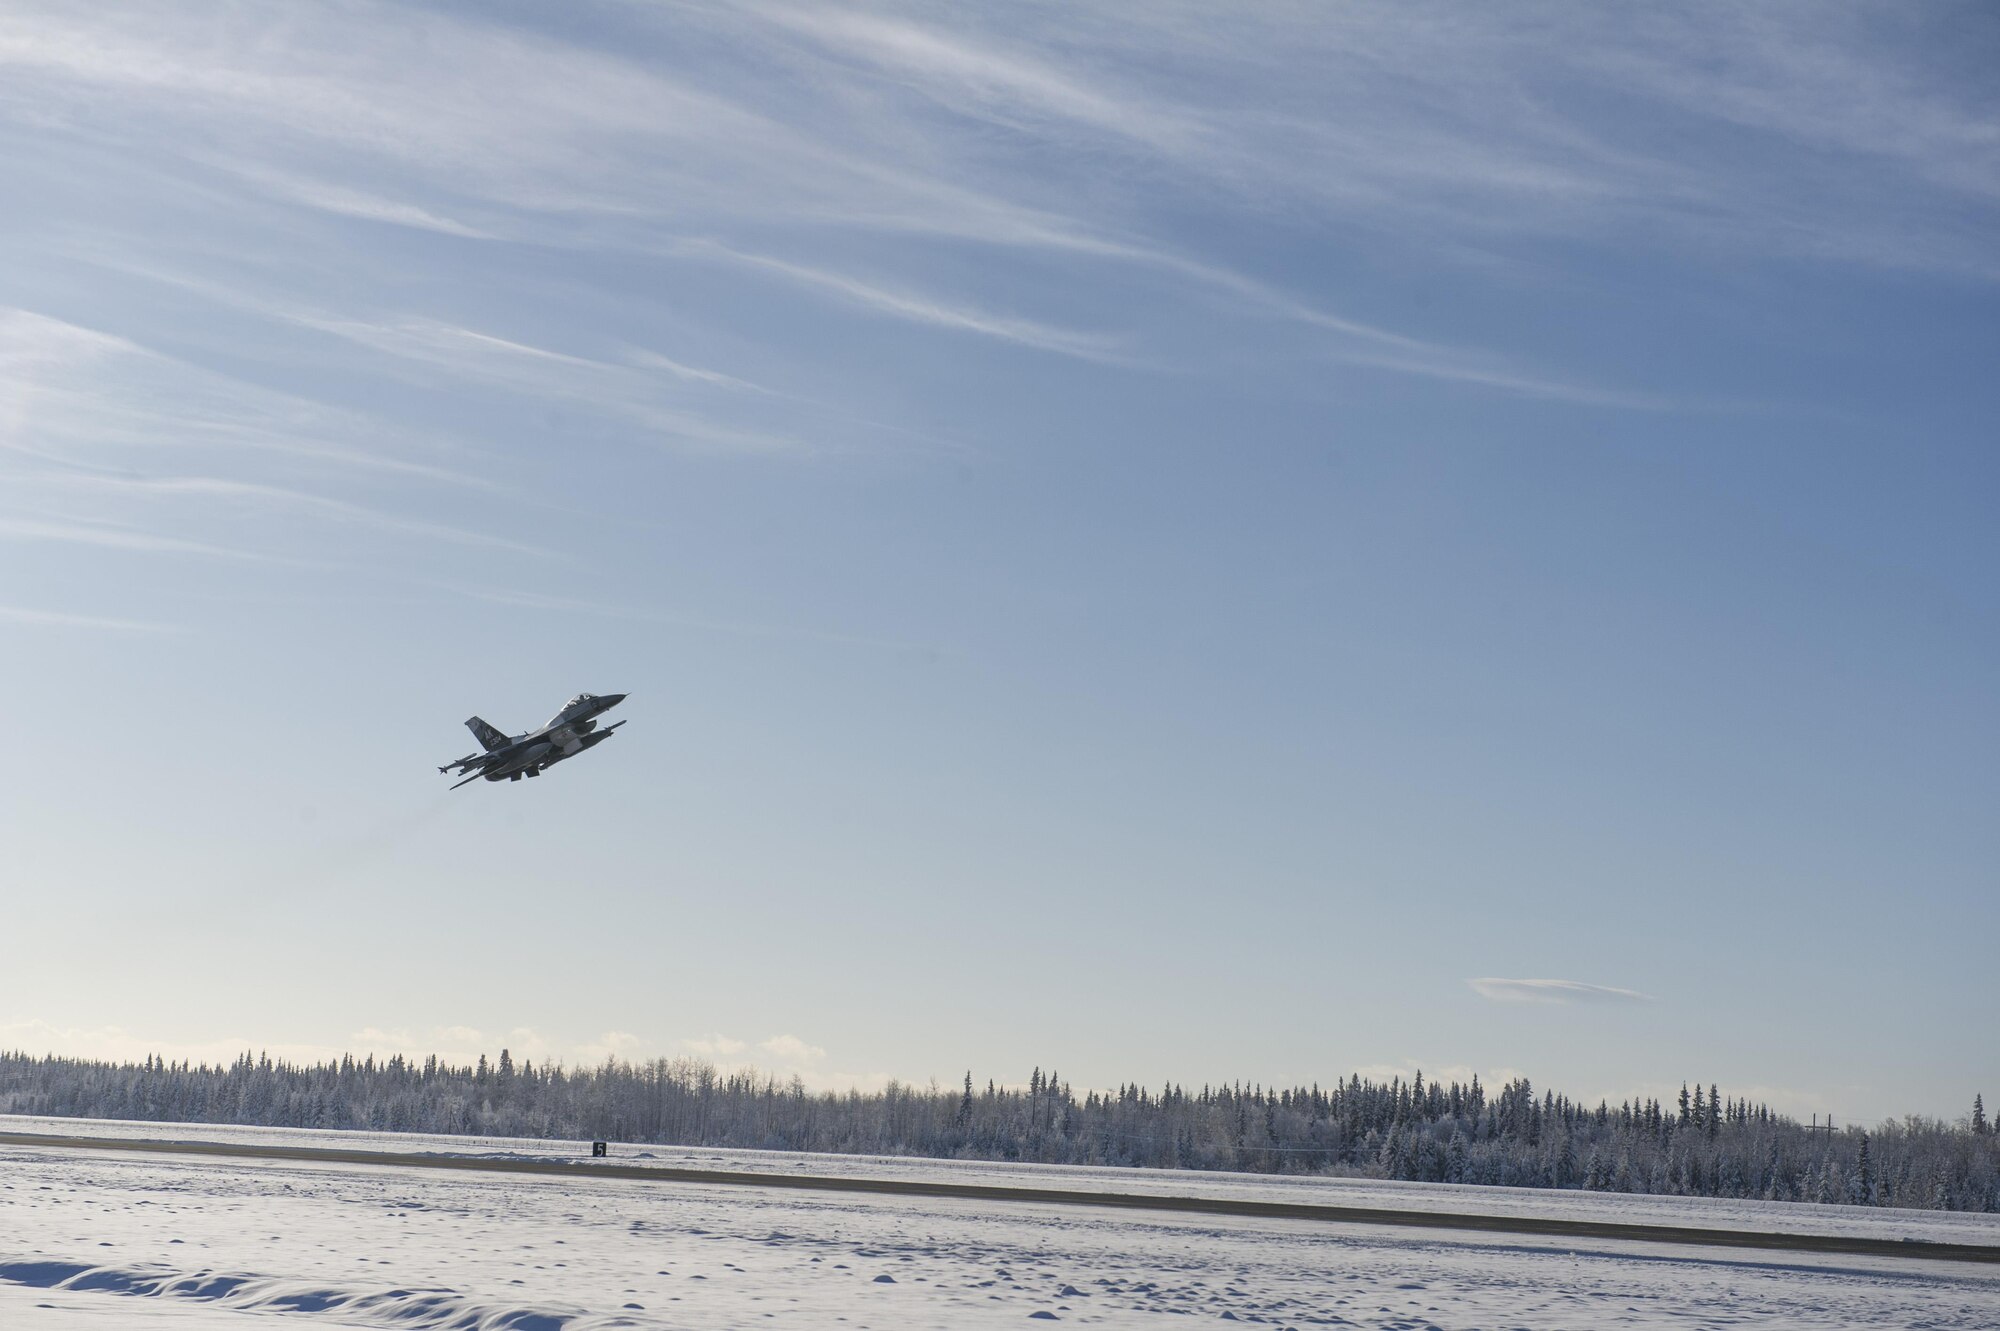 A U.S. Air Force F-16 Fighting Falcon aircraft assigned to the 18th Aggressor Squadron, takes off from the Eielson Air Force Base, Alaska, flight line Feb. 12, 2017. Members of the 18th AGRS began their journey to Andersen Air Force Base, Guam, in support of COPE NORTH 2017 which is an exercise that prepares U.S. and coalition forces for possible contingency operations. (U.S. Air Force photo by Airman Isaac Johnson)